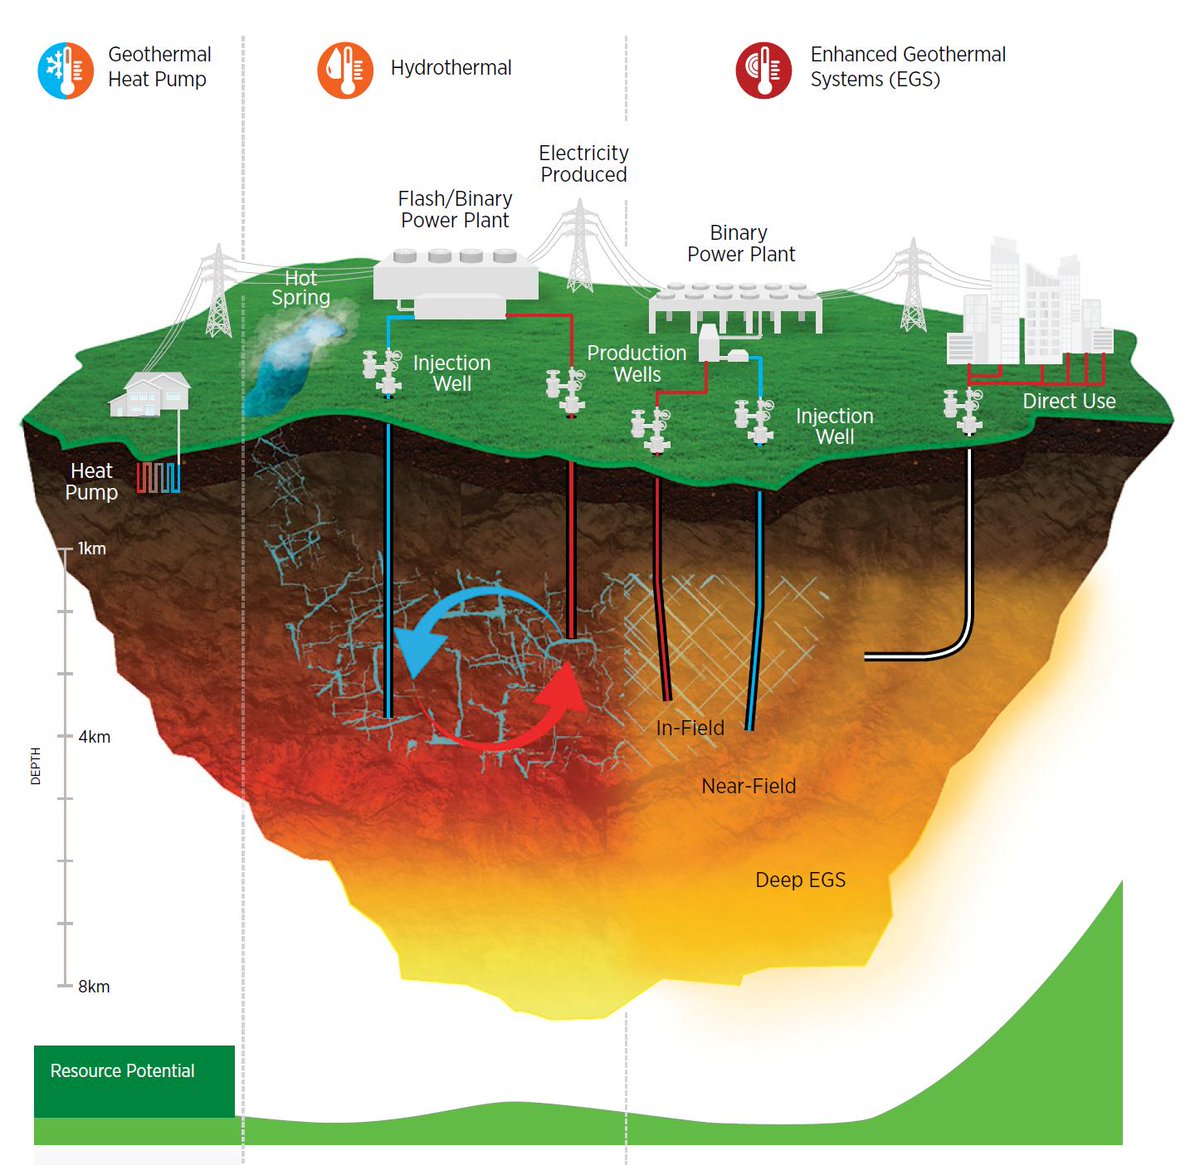 3/First, it’s full of great graphics, like this one that answers common questions on what geothermal is, showing the spectrum from residential ground source heat pumps to direct use to electricity generating systems.